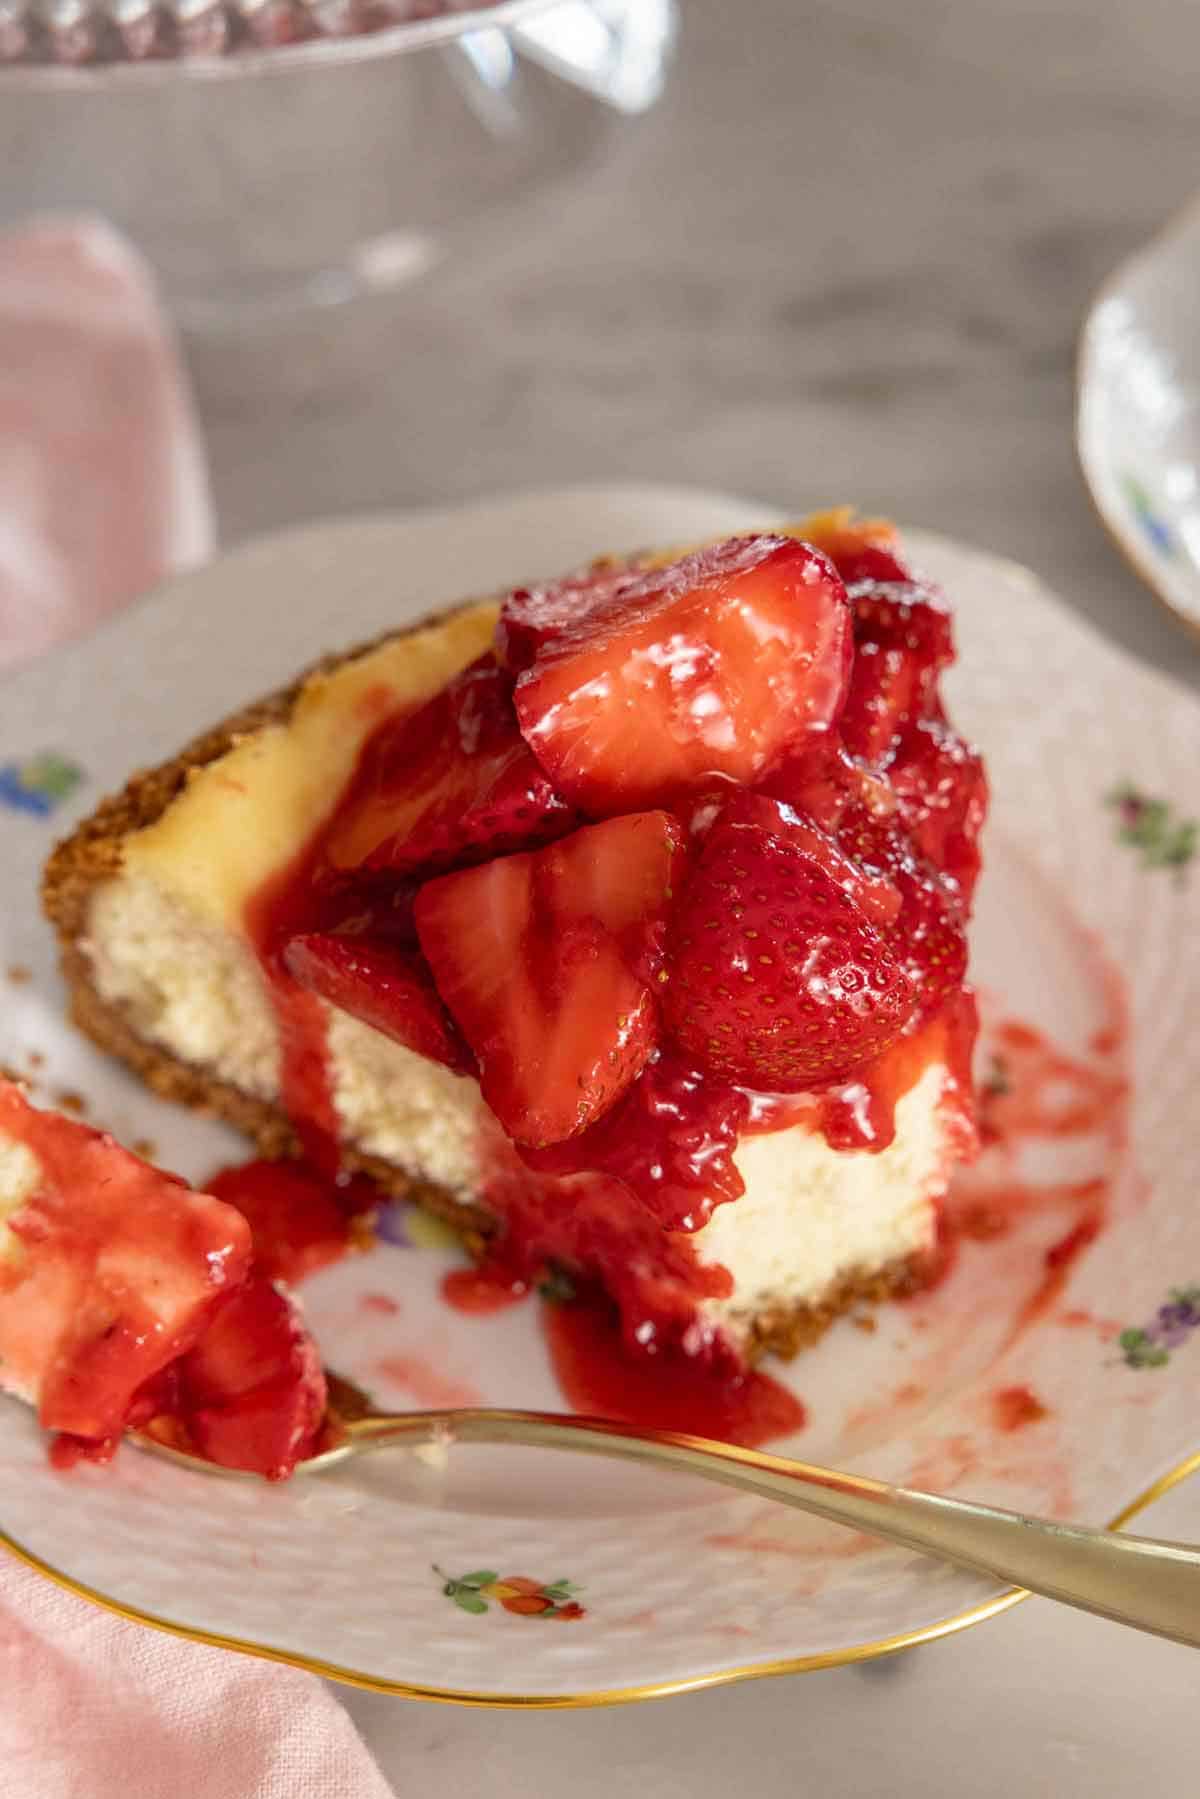 A slice of strawberry cheesecake on a plate with the tip of the slice on a fork beside it.